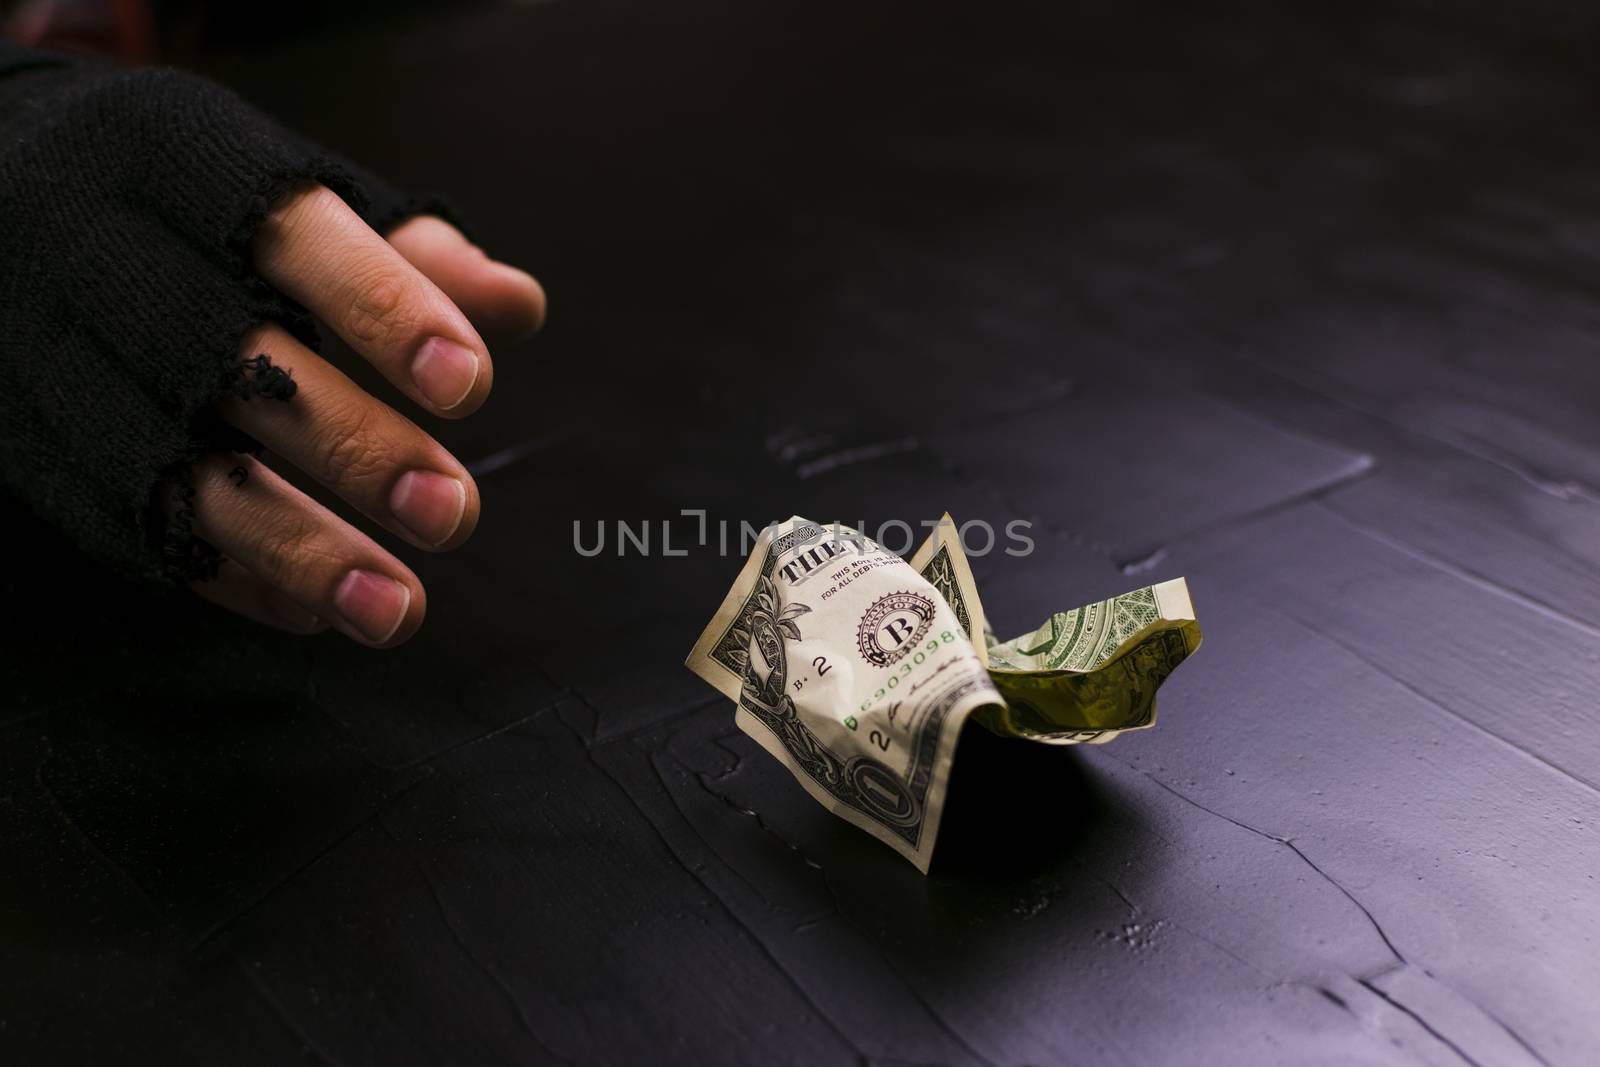 The man reaches for a dollar bill. Day for the eradication of poverty.